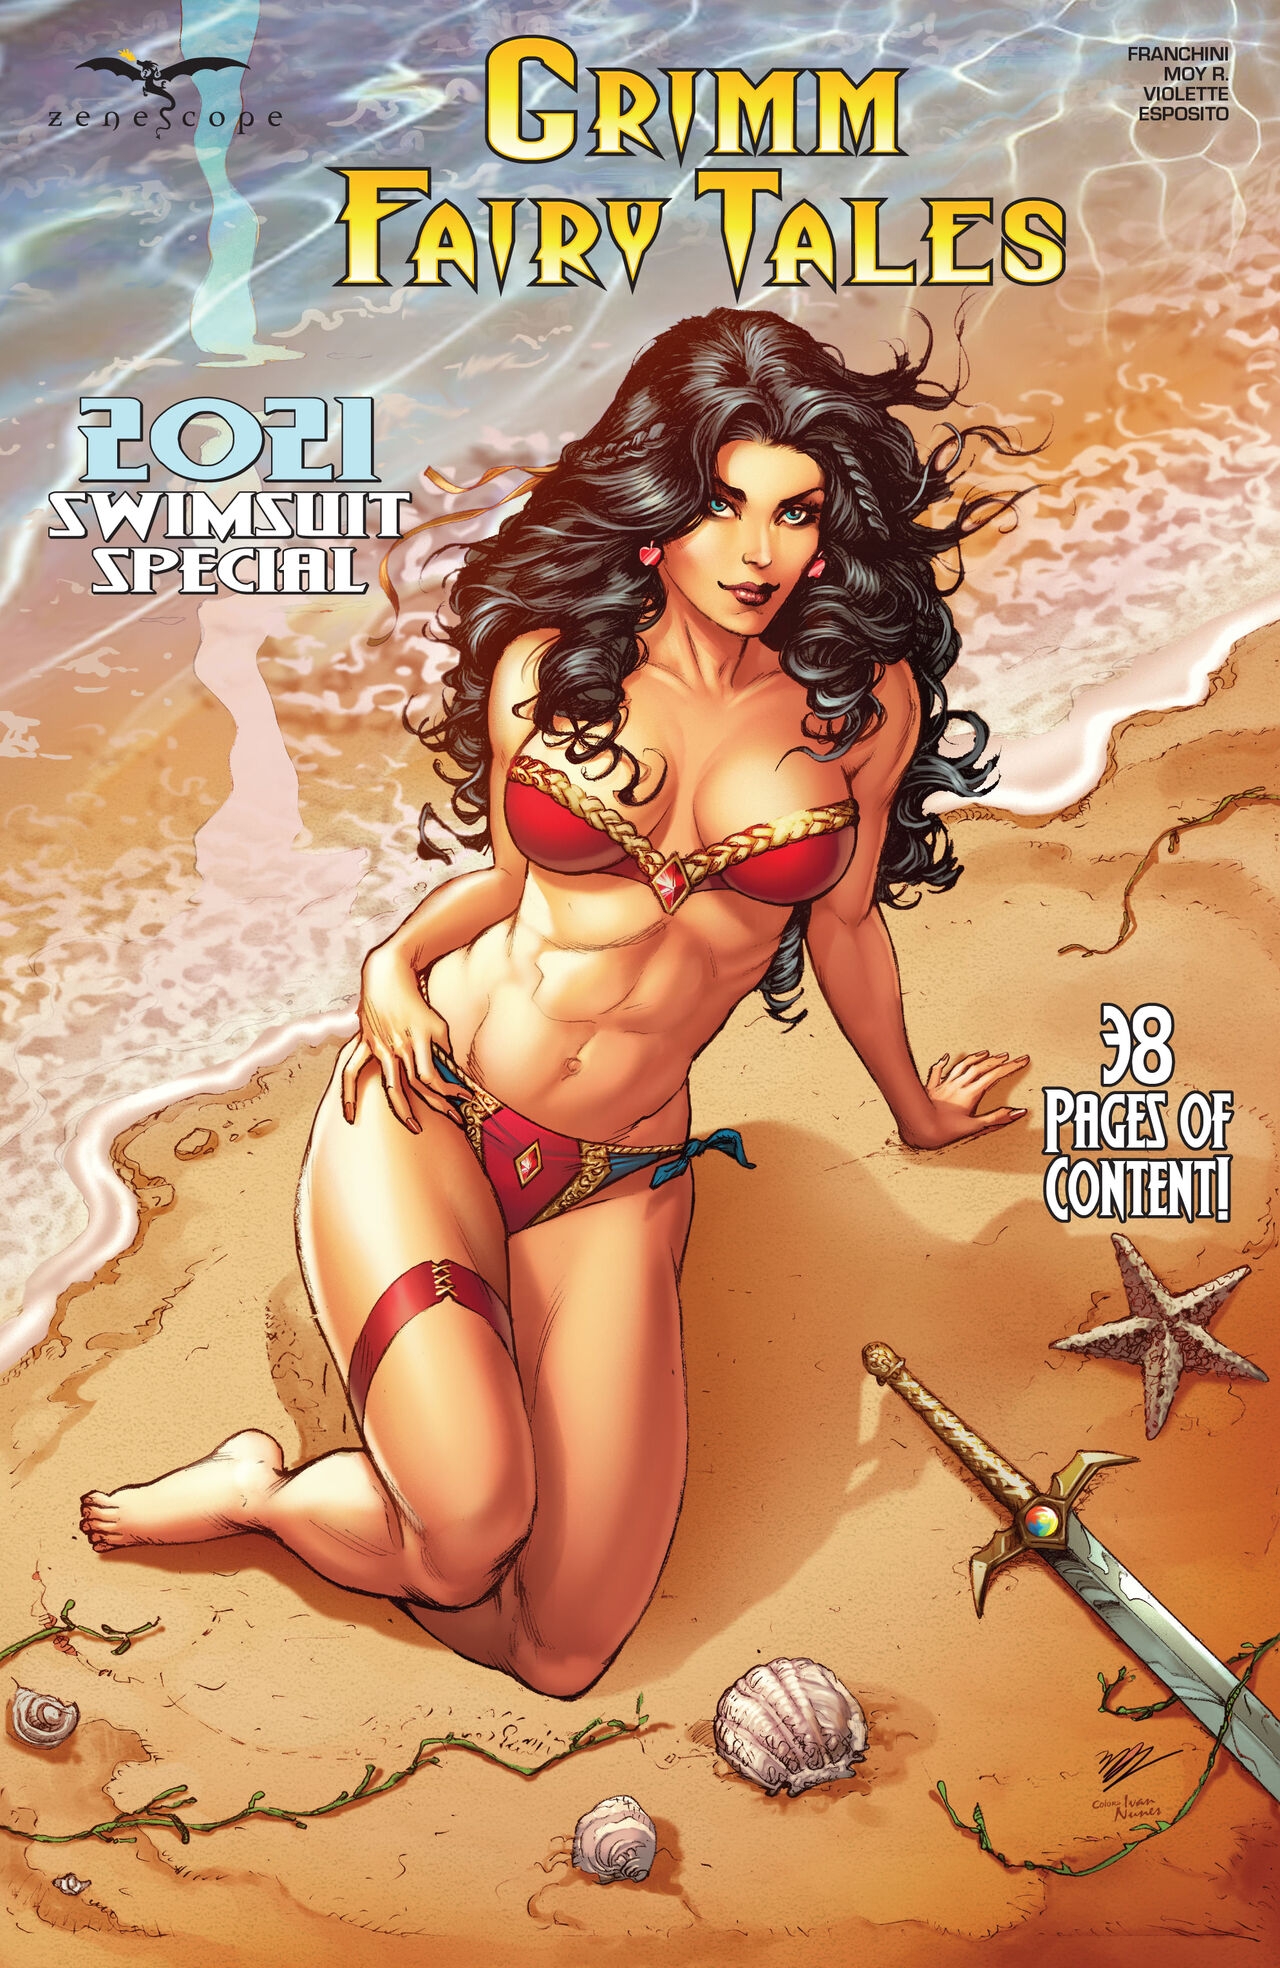 Grimm Fairy Tales 2021 Swimsuit Special 0